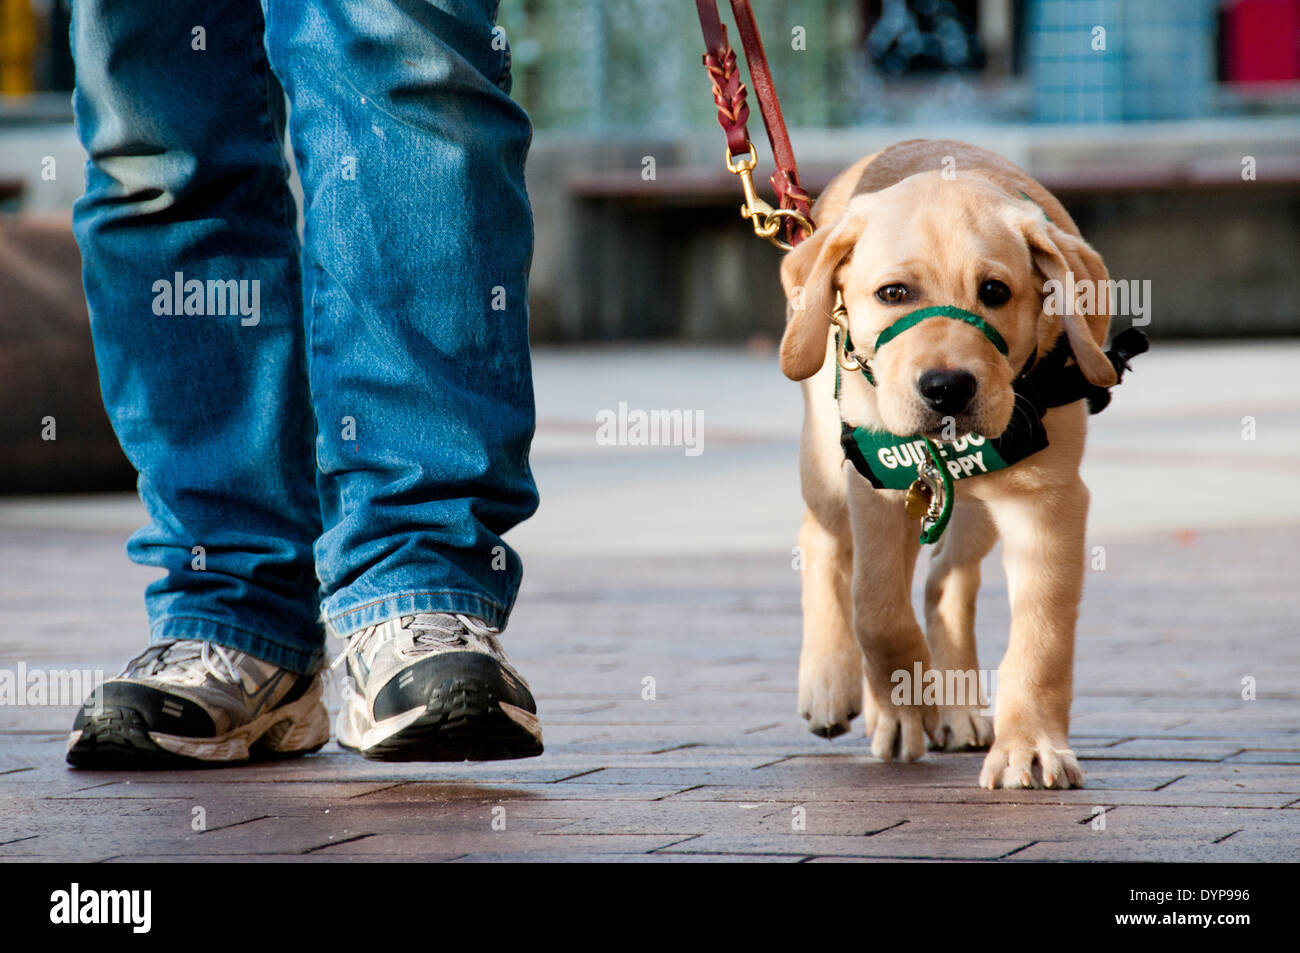 Trainer walking guide dog puppy in training Stock Photo